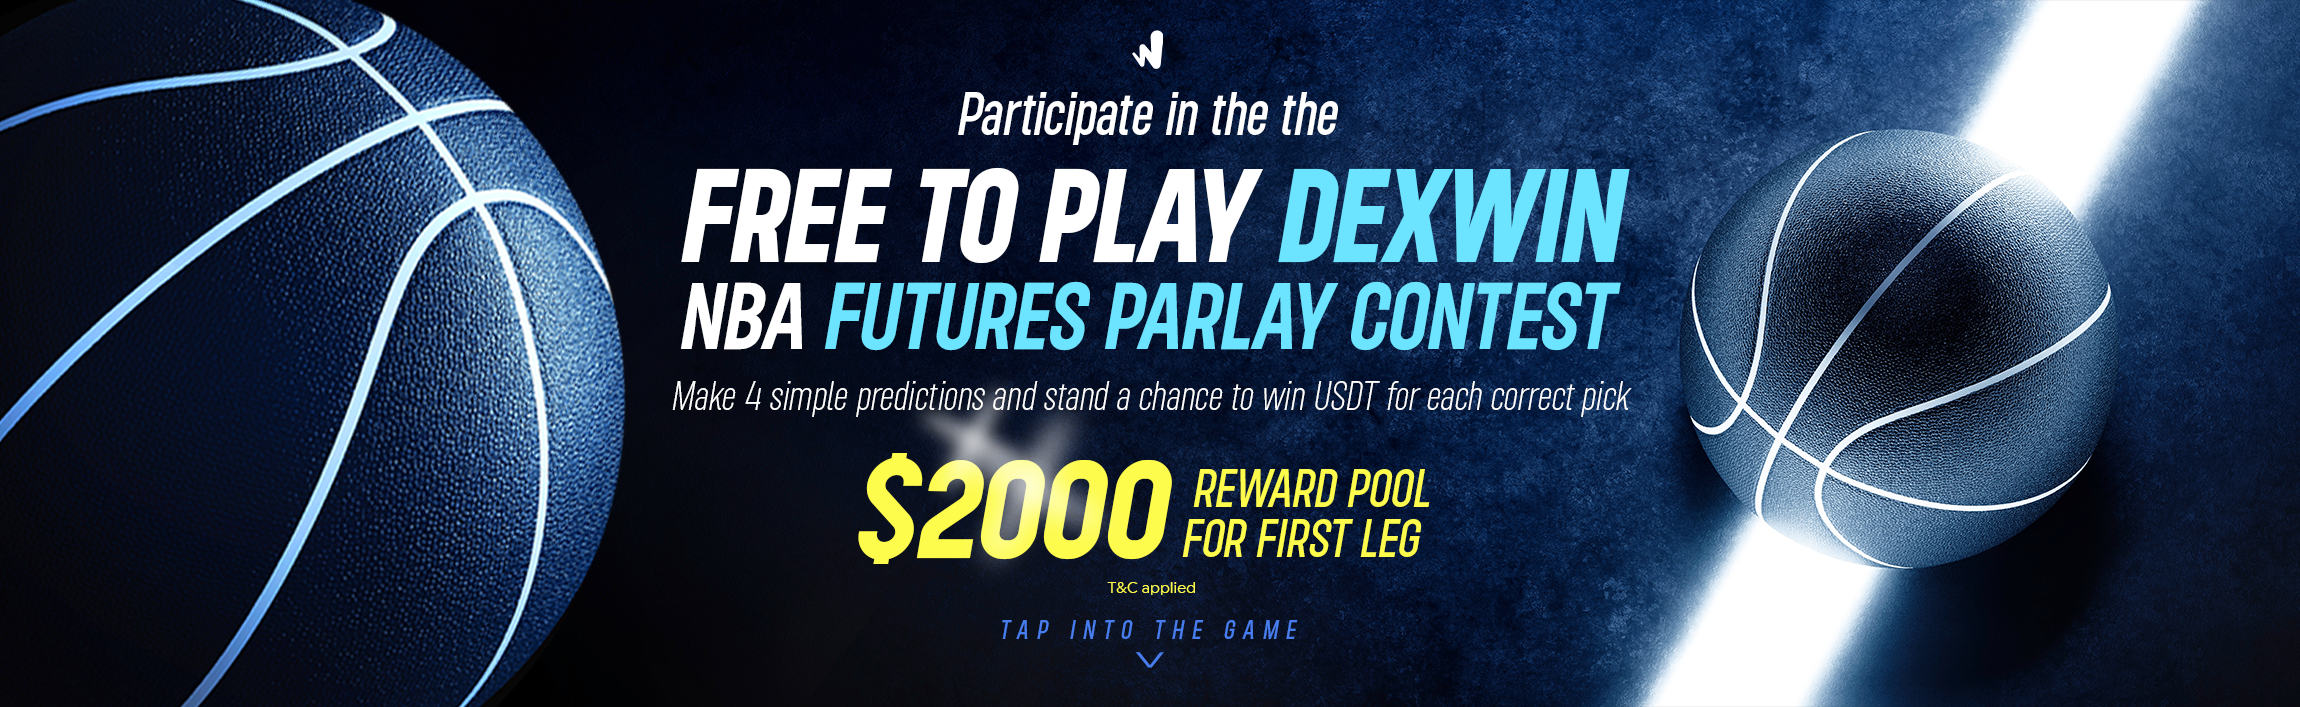 Welcome to the DexWin Futures Parlay Contest, where you have a chance to compete against other participants to see who can correctly predict the outcome of selected scheduled games & props through 4 legs or cards of the 2023-24 NBA Season. To enter the Challenge, participants need to simply connect their decentralized wallets, make their free picks across 4 different legs and join the dexwin social communities on discord, telegram or twitter